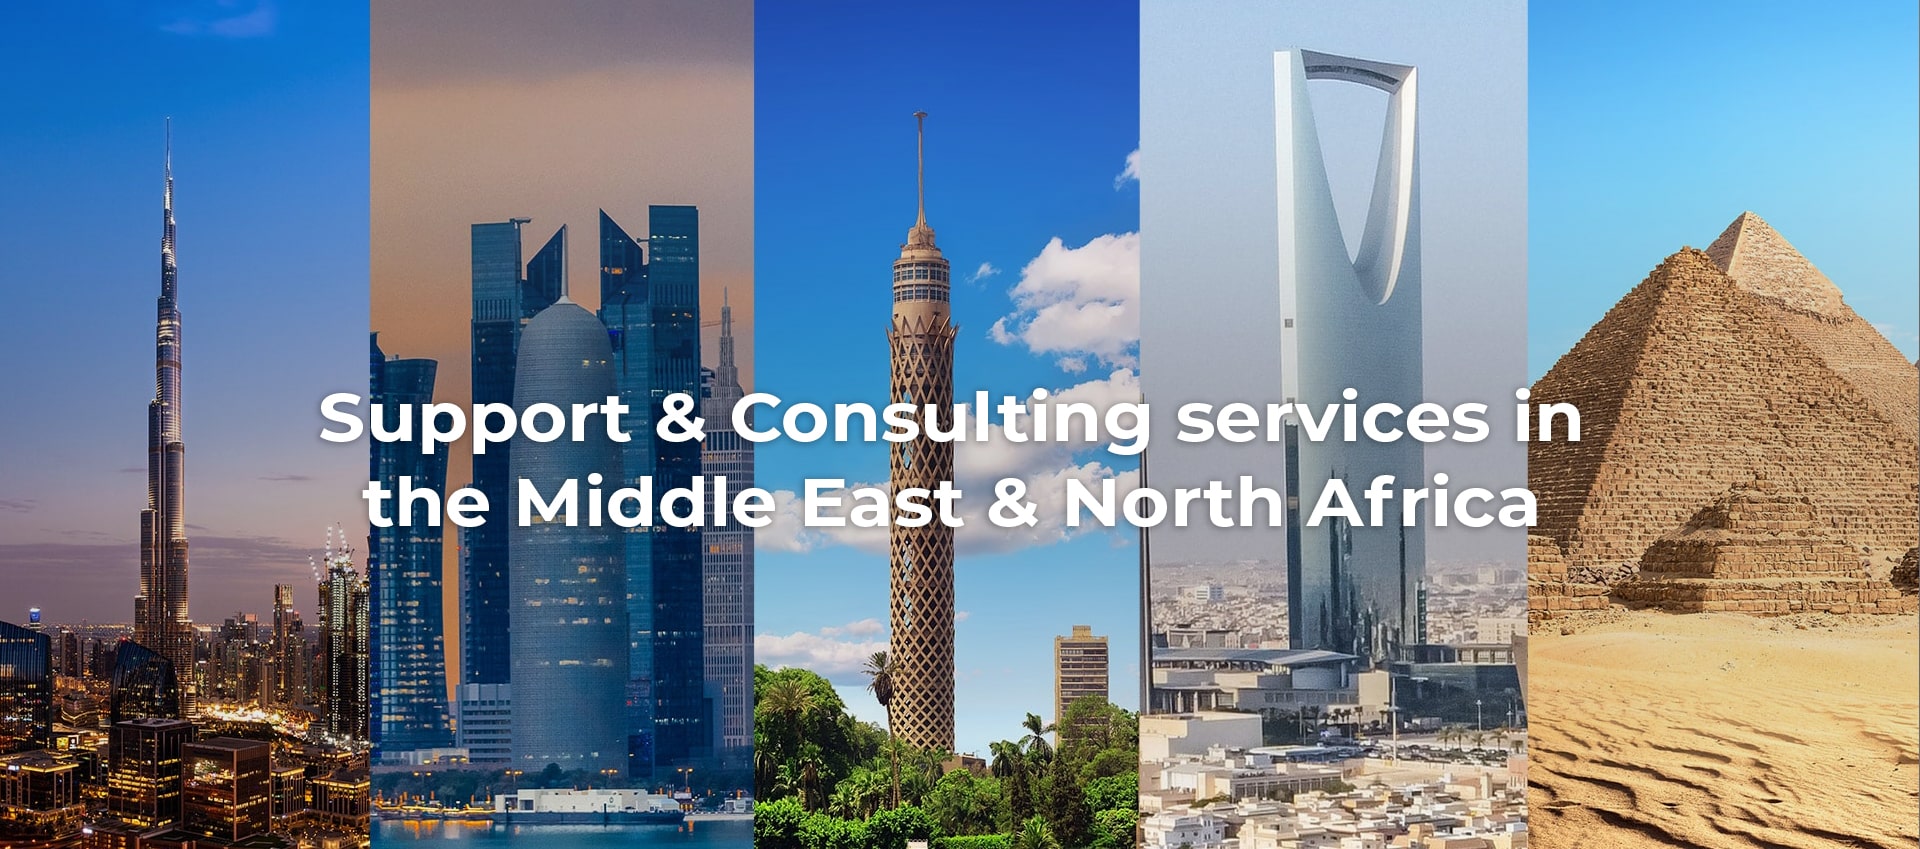 https://ttegulf.com/wp-content/uploads/2022/04/consulting-services.jpg